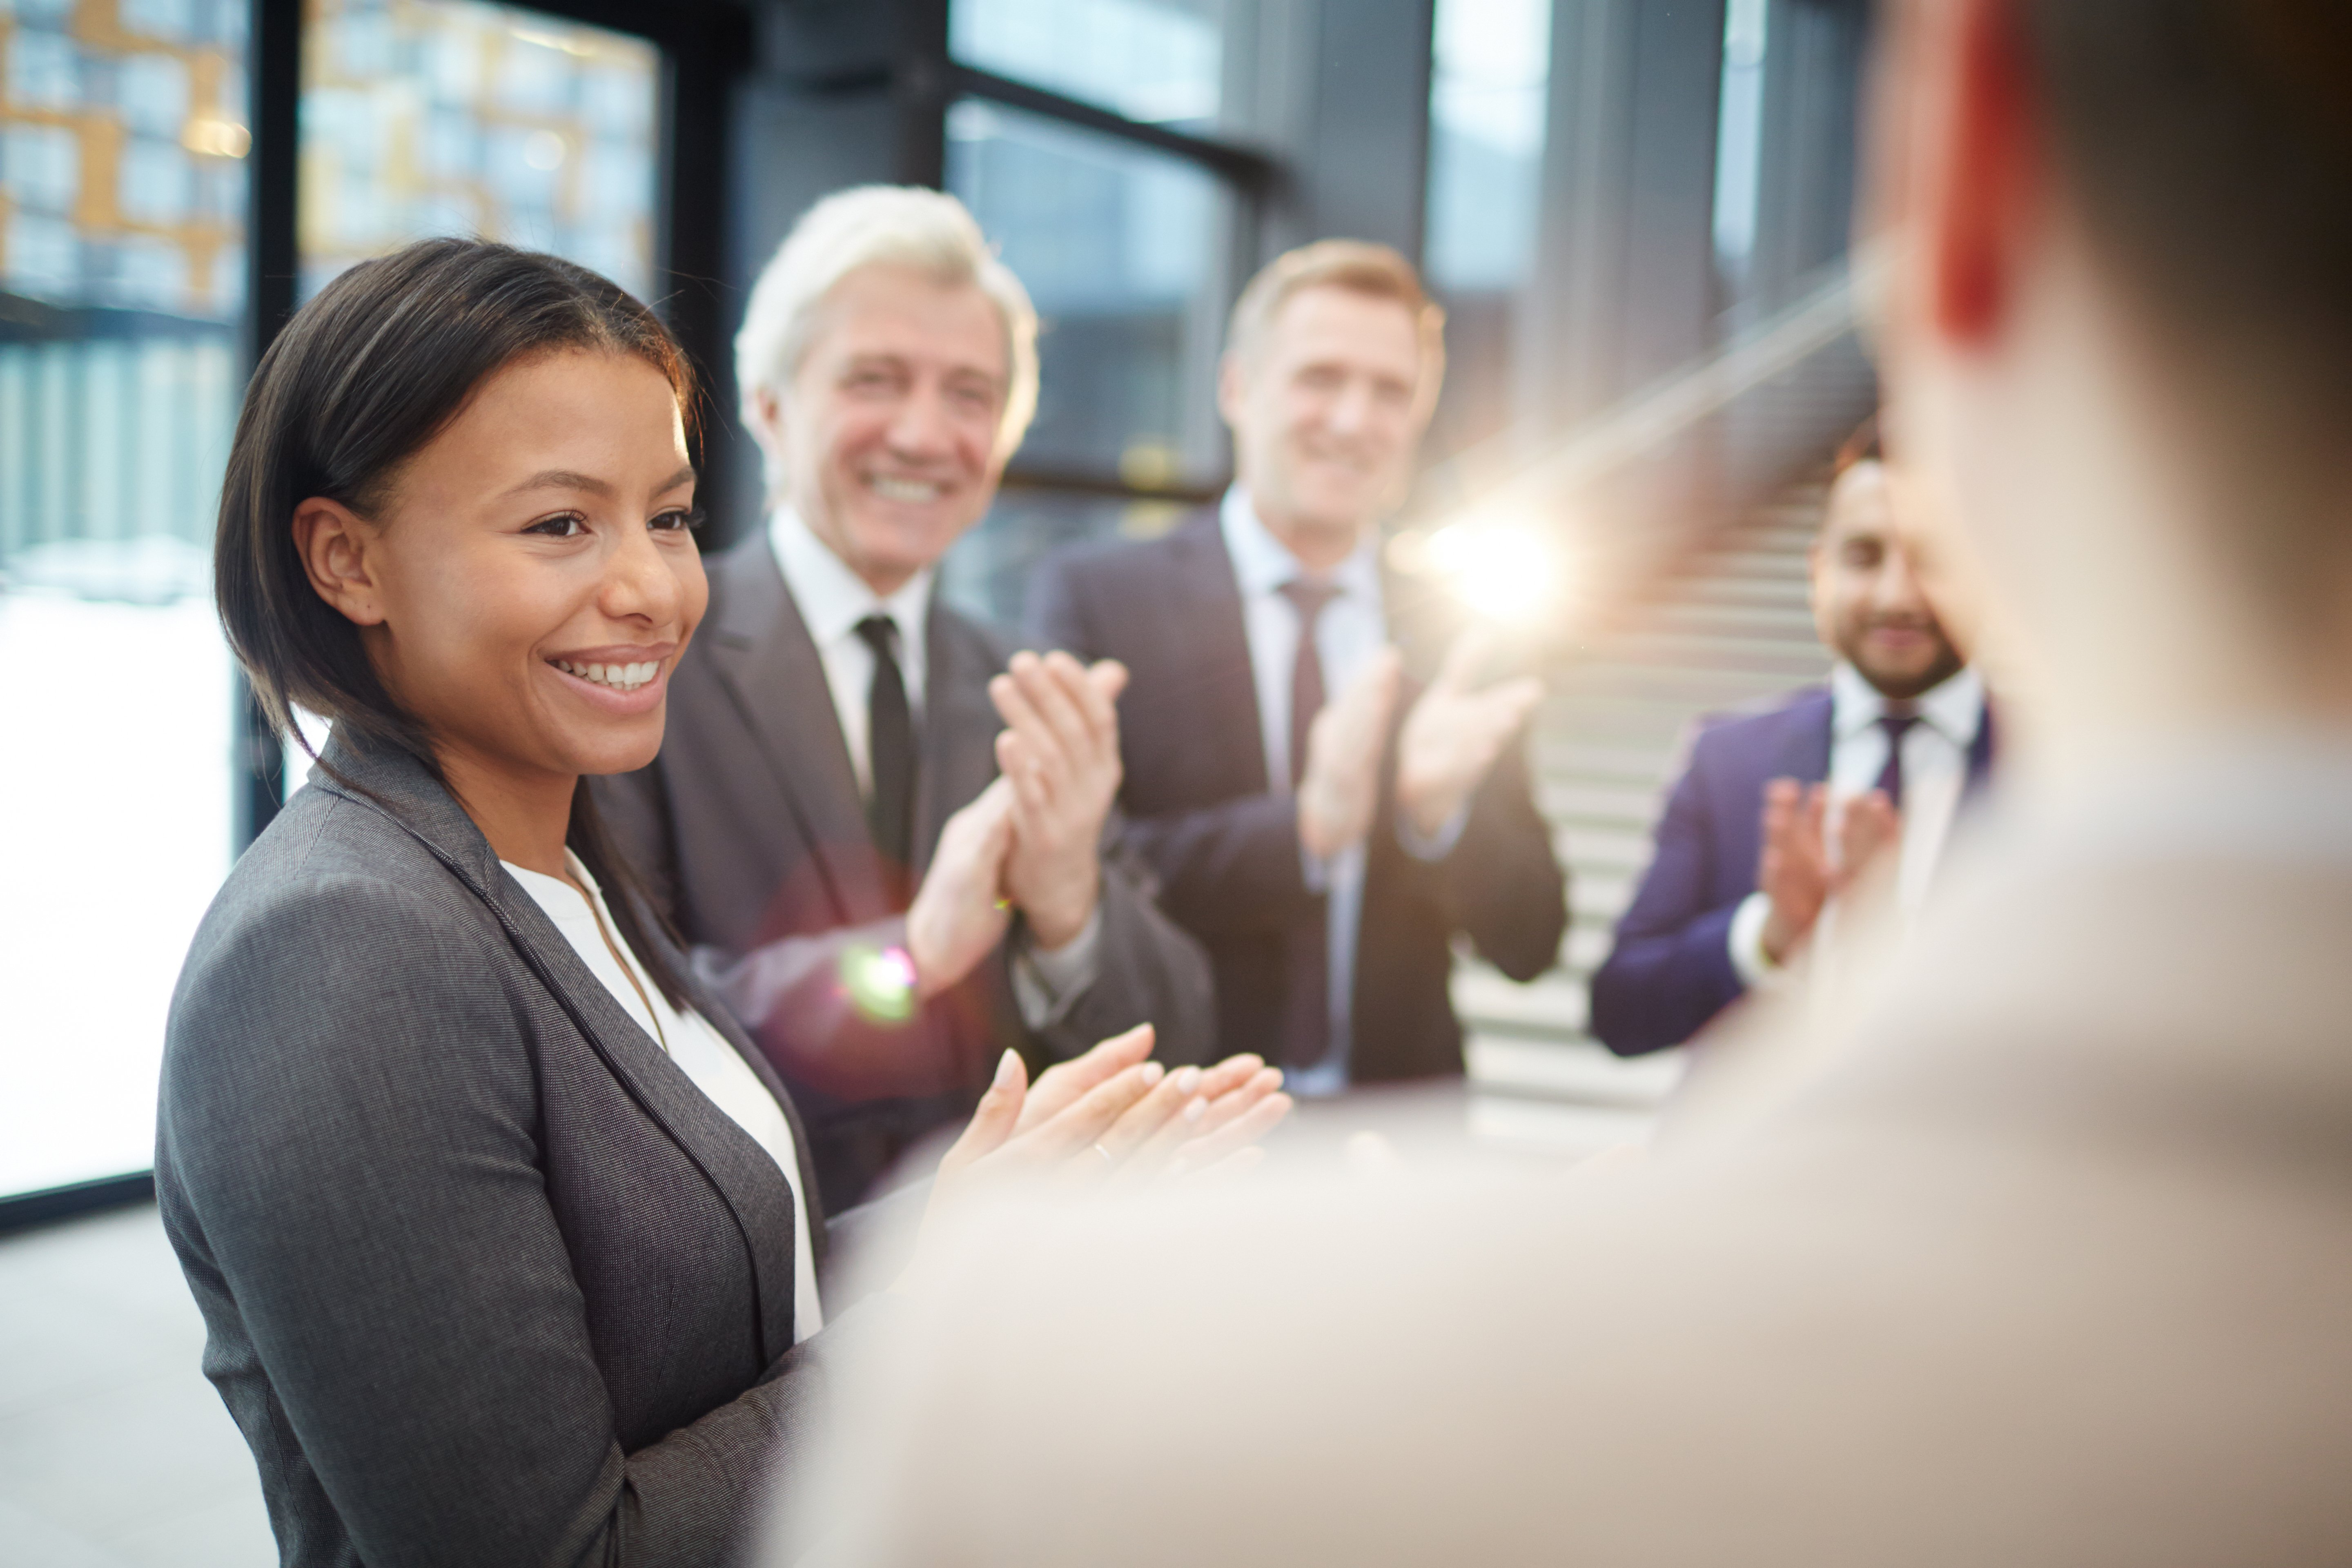 public-sector-group-of-coworkers-suits-smiling-clapping.jpg